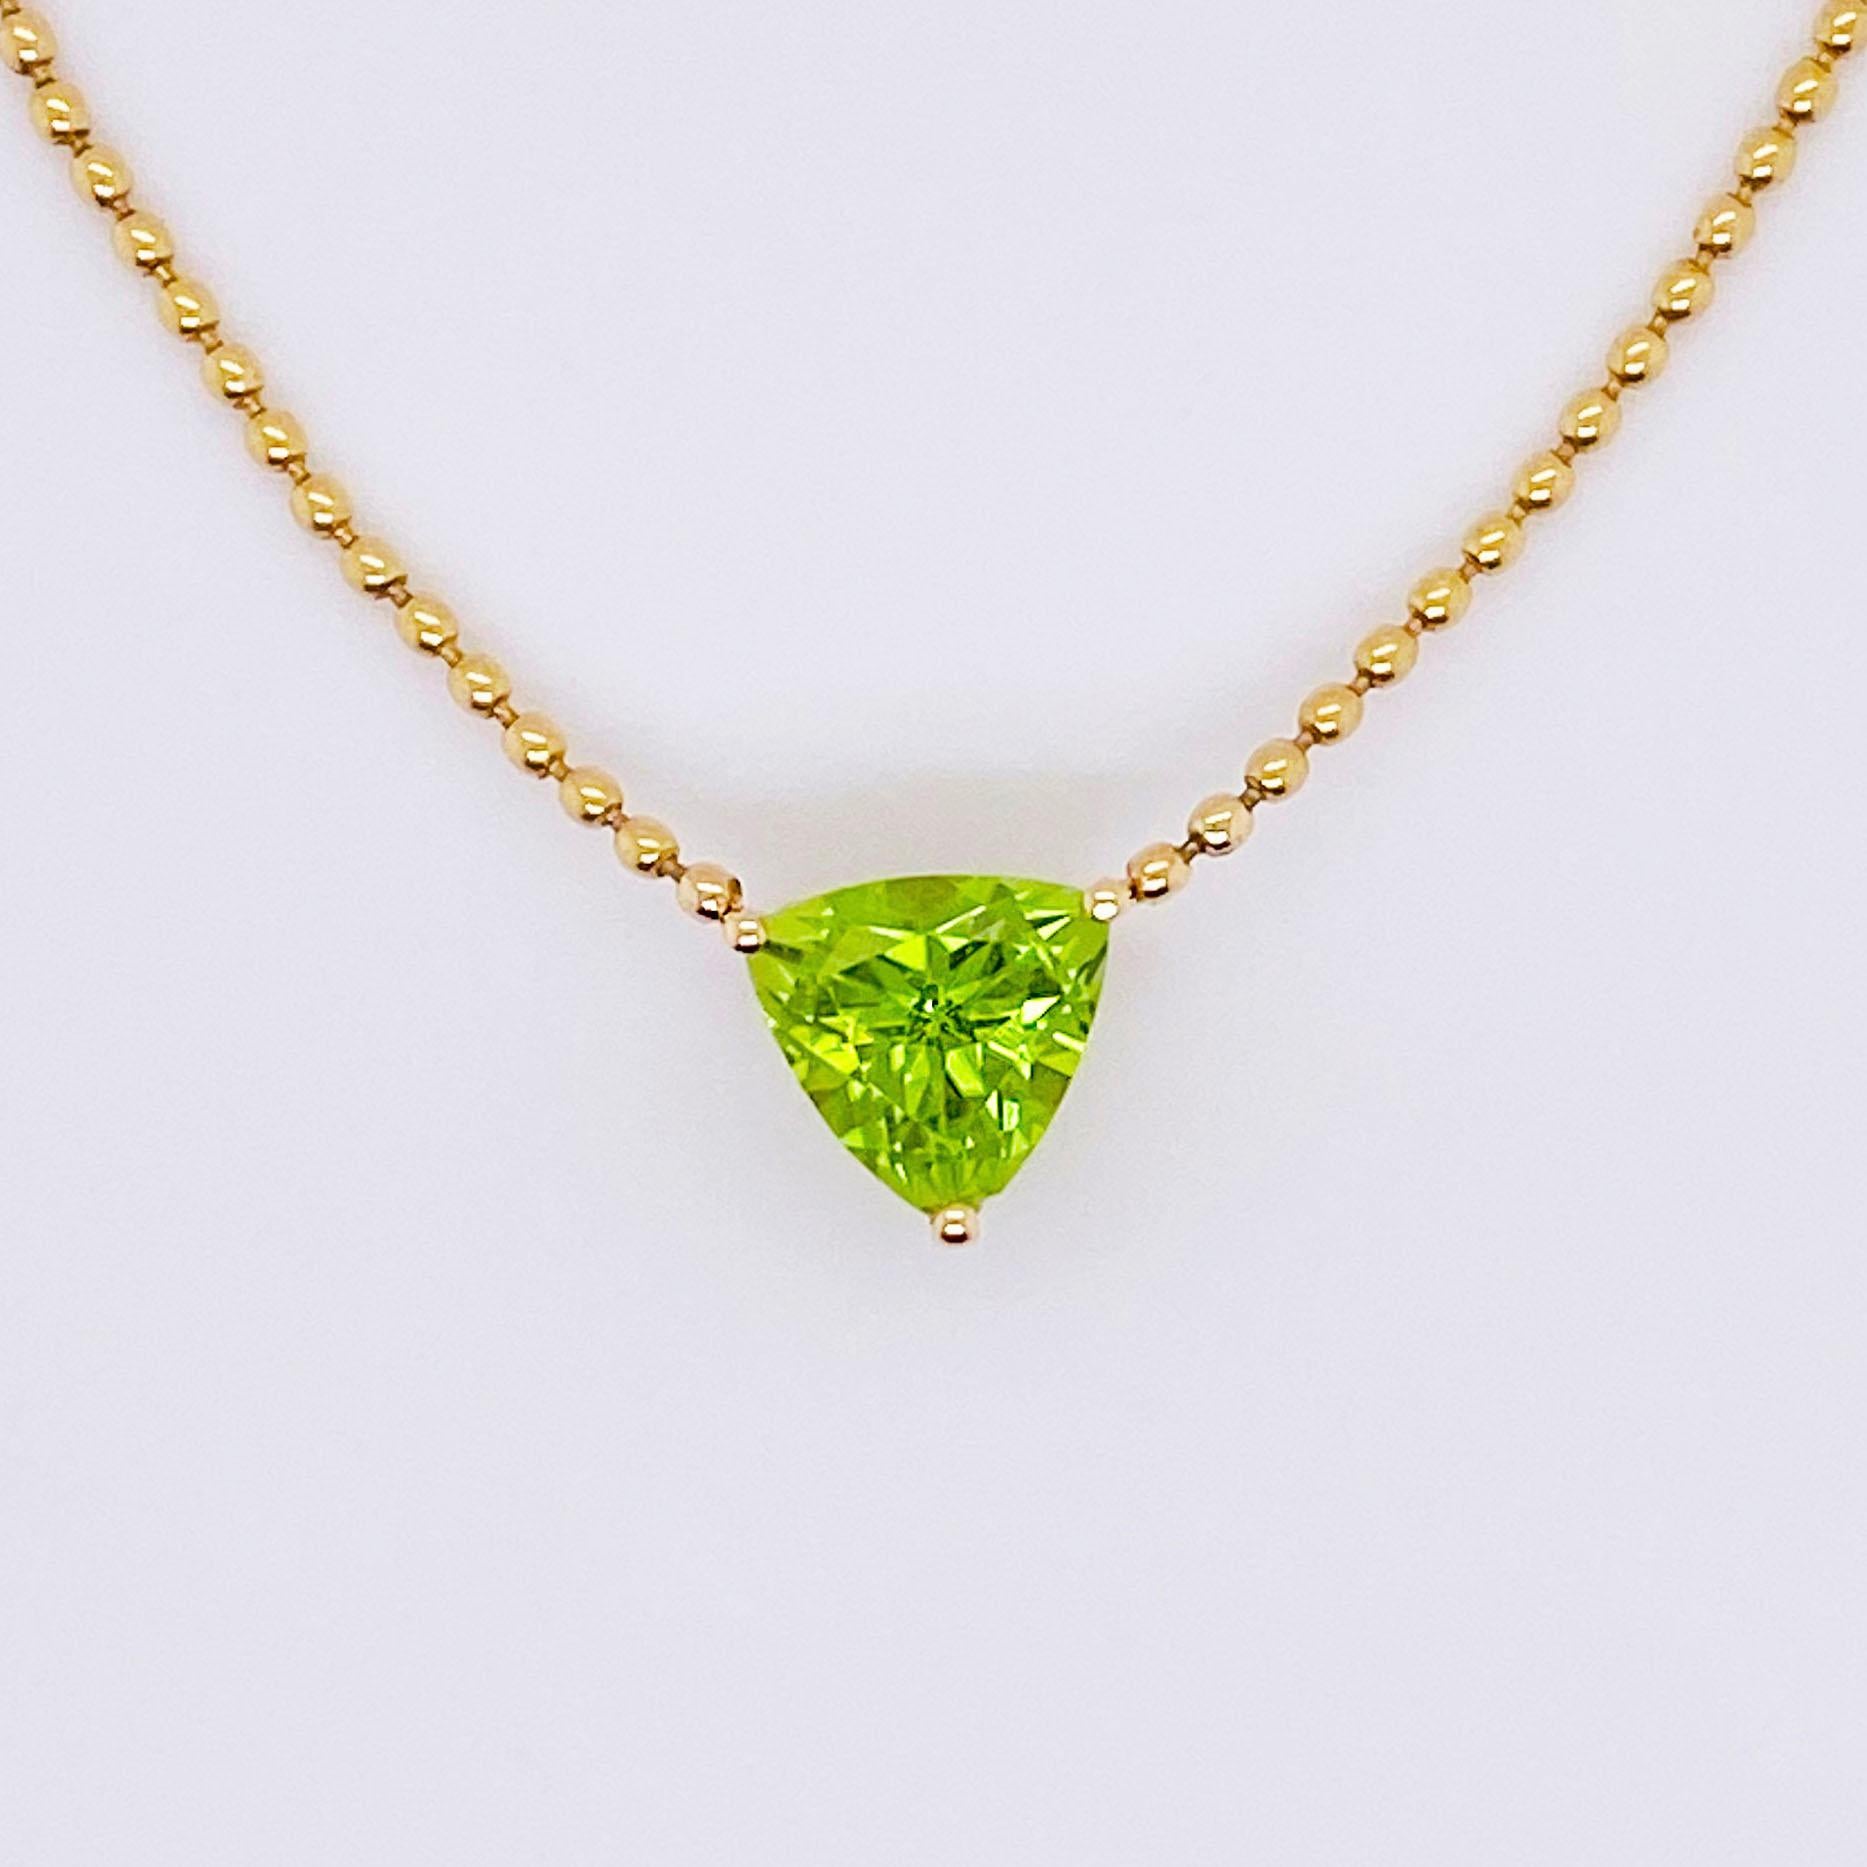 Trillion Cut Trillion Peridot 1.25cts Stationary Pendant Necklace 14K Yellow Gold For Sale